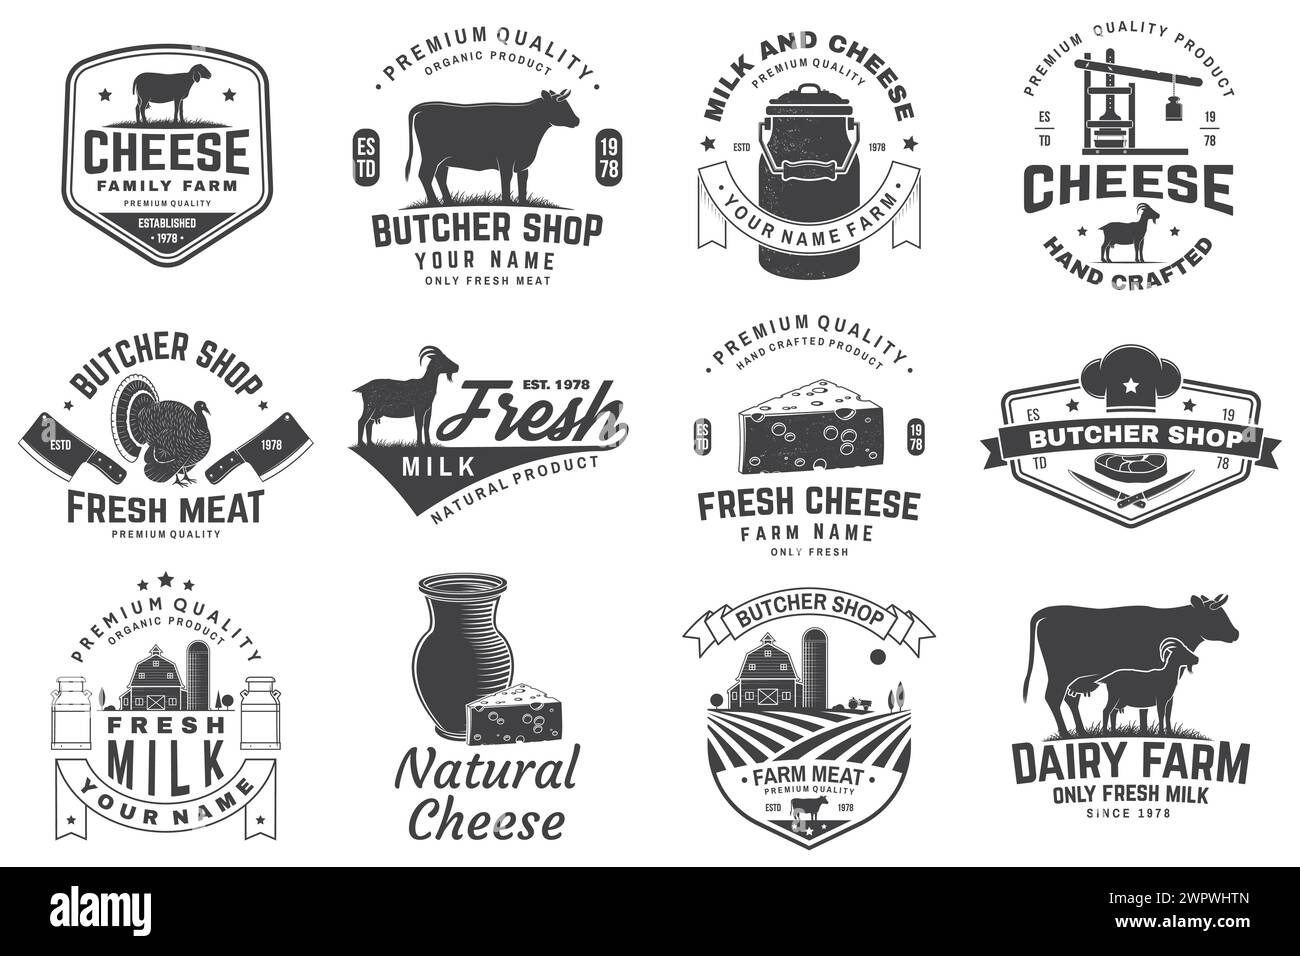 Cheese, butcher, dairy and milk family farm badge design. Template for butcher, cheese, dairy and milk farm business - shop, market, packaging and Stock Vector